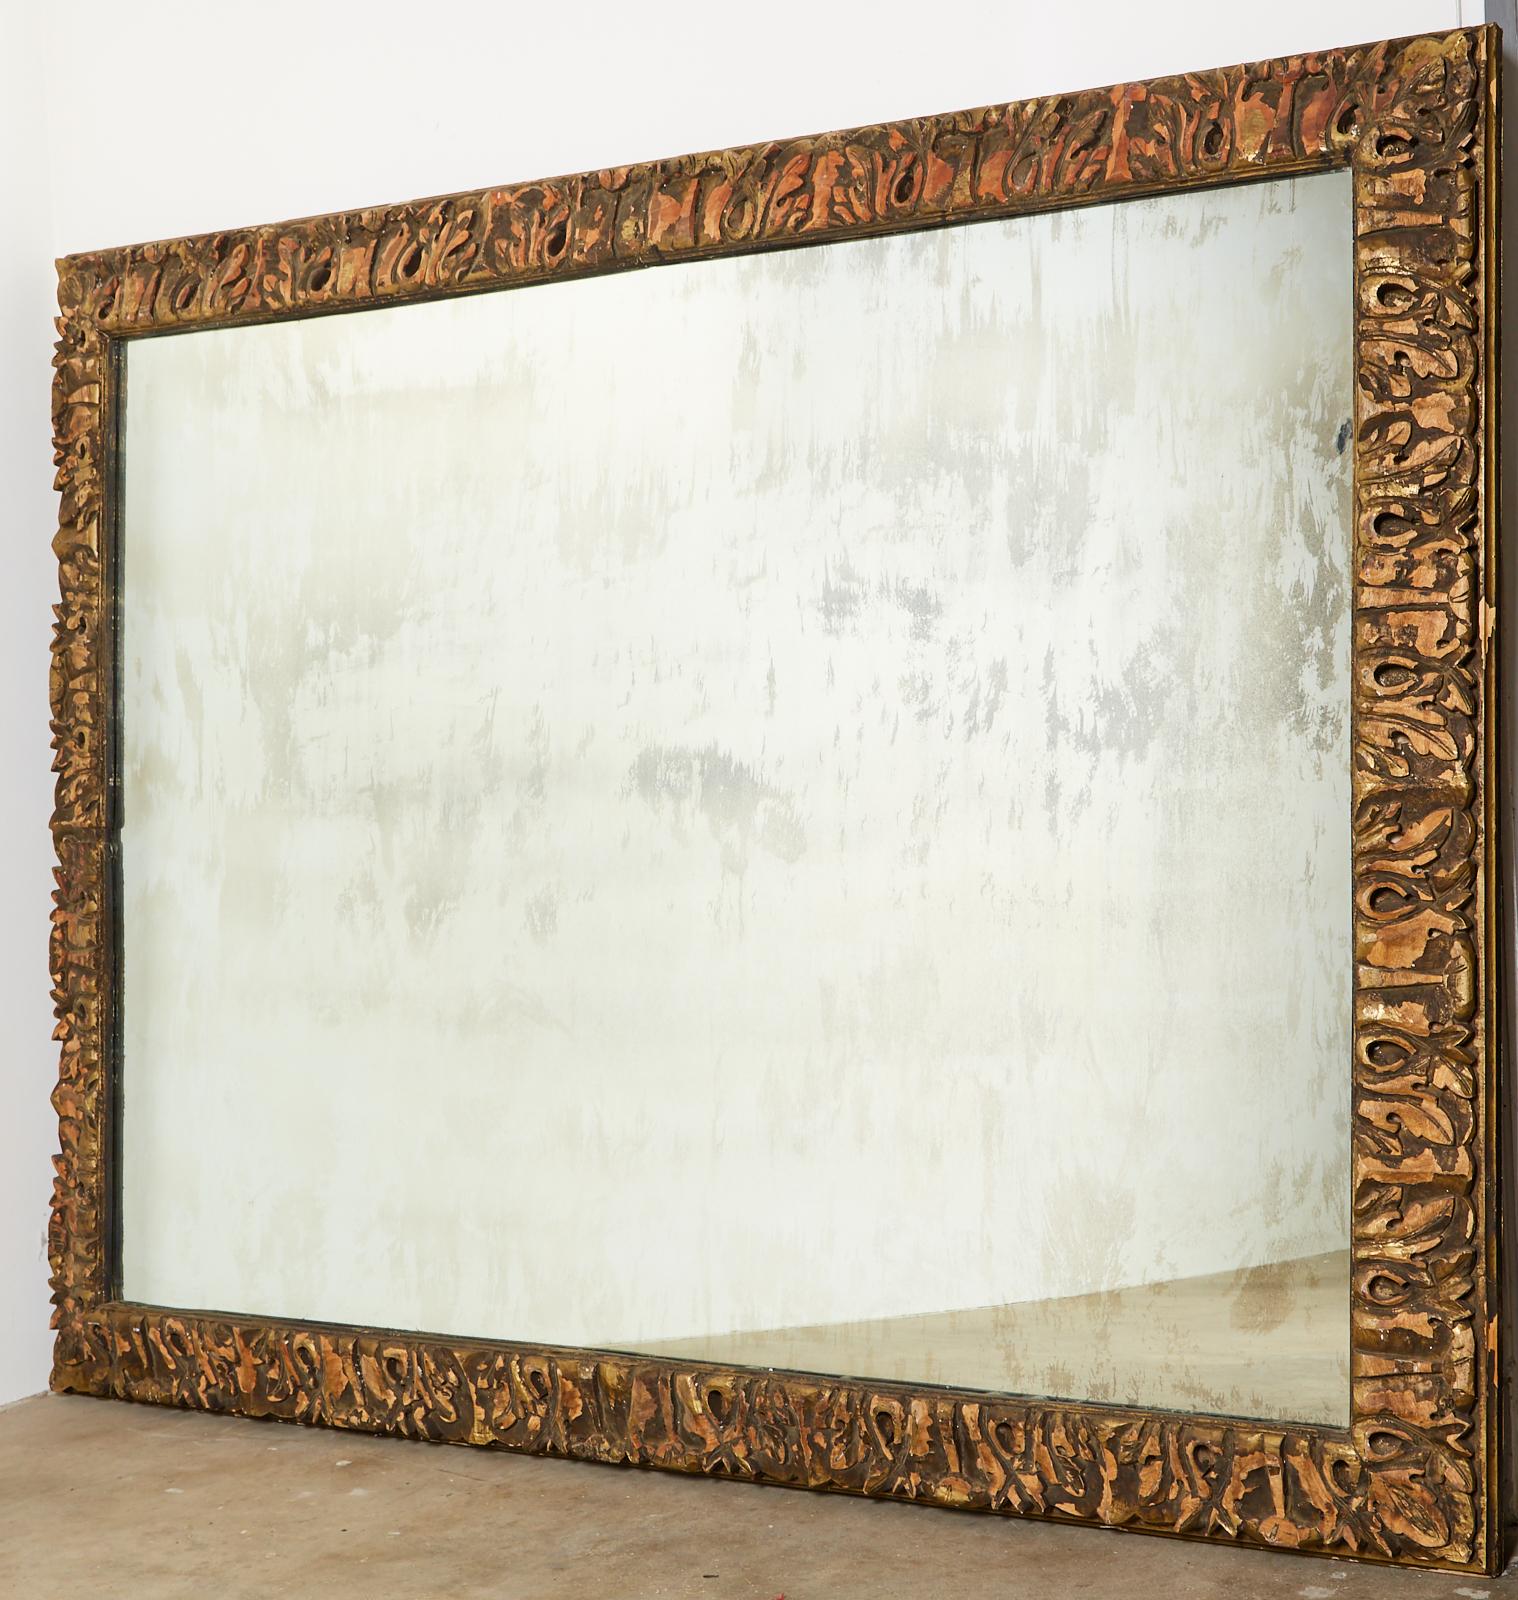 Monumental custom made mirror featuring a thick, hand-carved parcel gilt frame. The mirror is decorated with stylized acanthus leaves having an aged and distressed patina. The large glass has intentional wear and age also. Bespoke mirror made for a